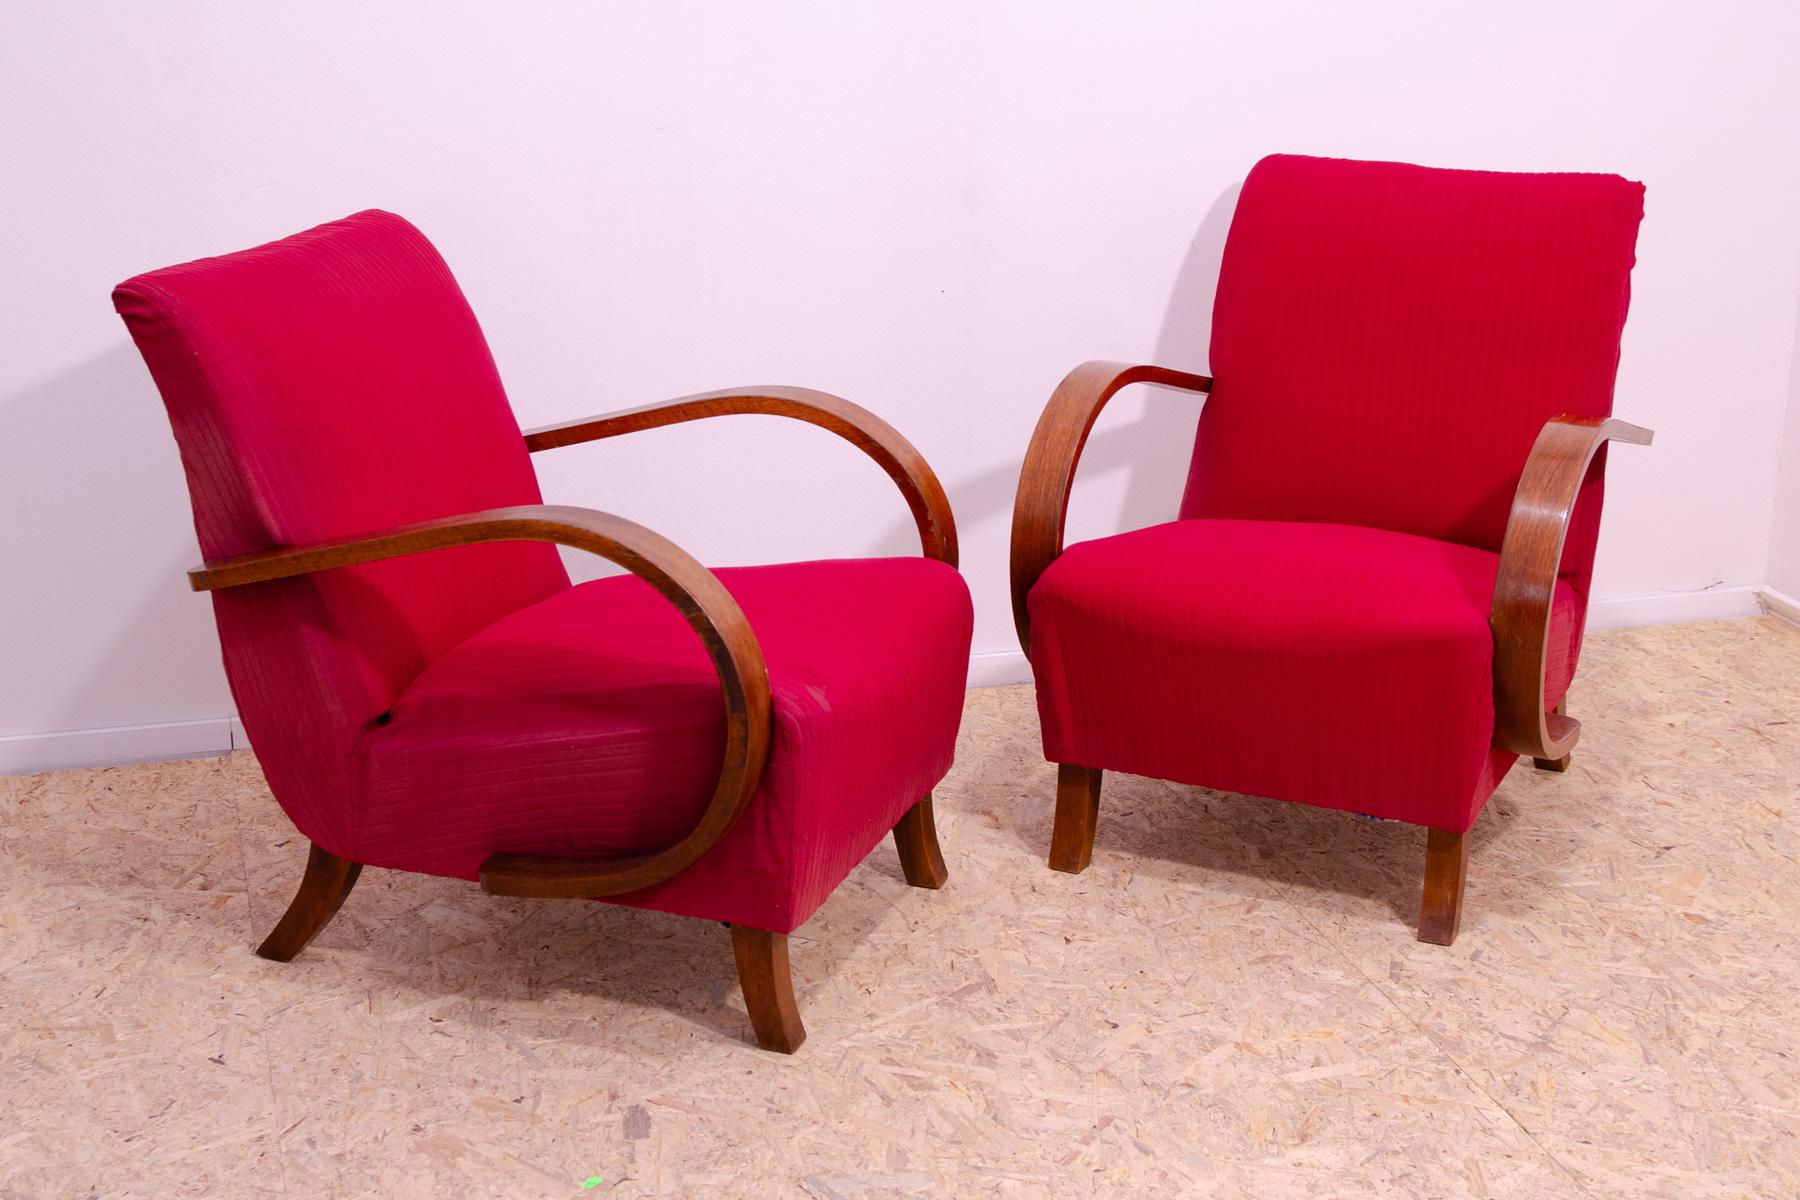 Pair of midcentury bentwood “C” armchairs designed by Jindřich Halabala and produced by UP Závody in the 1950´s. The chairs are stable and comfortable and overall are in good preserved Vintage condition, the fabric shows signs of age and